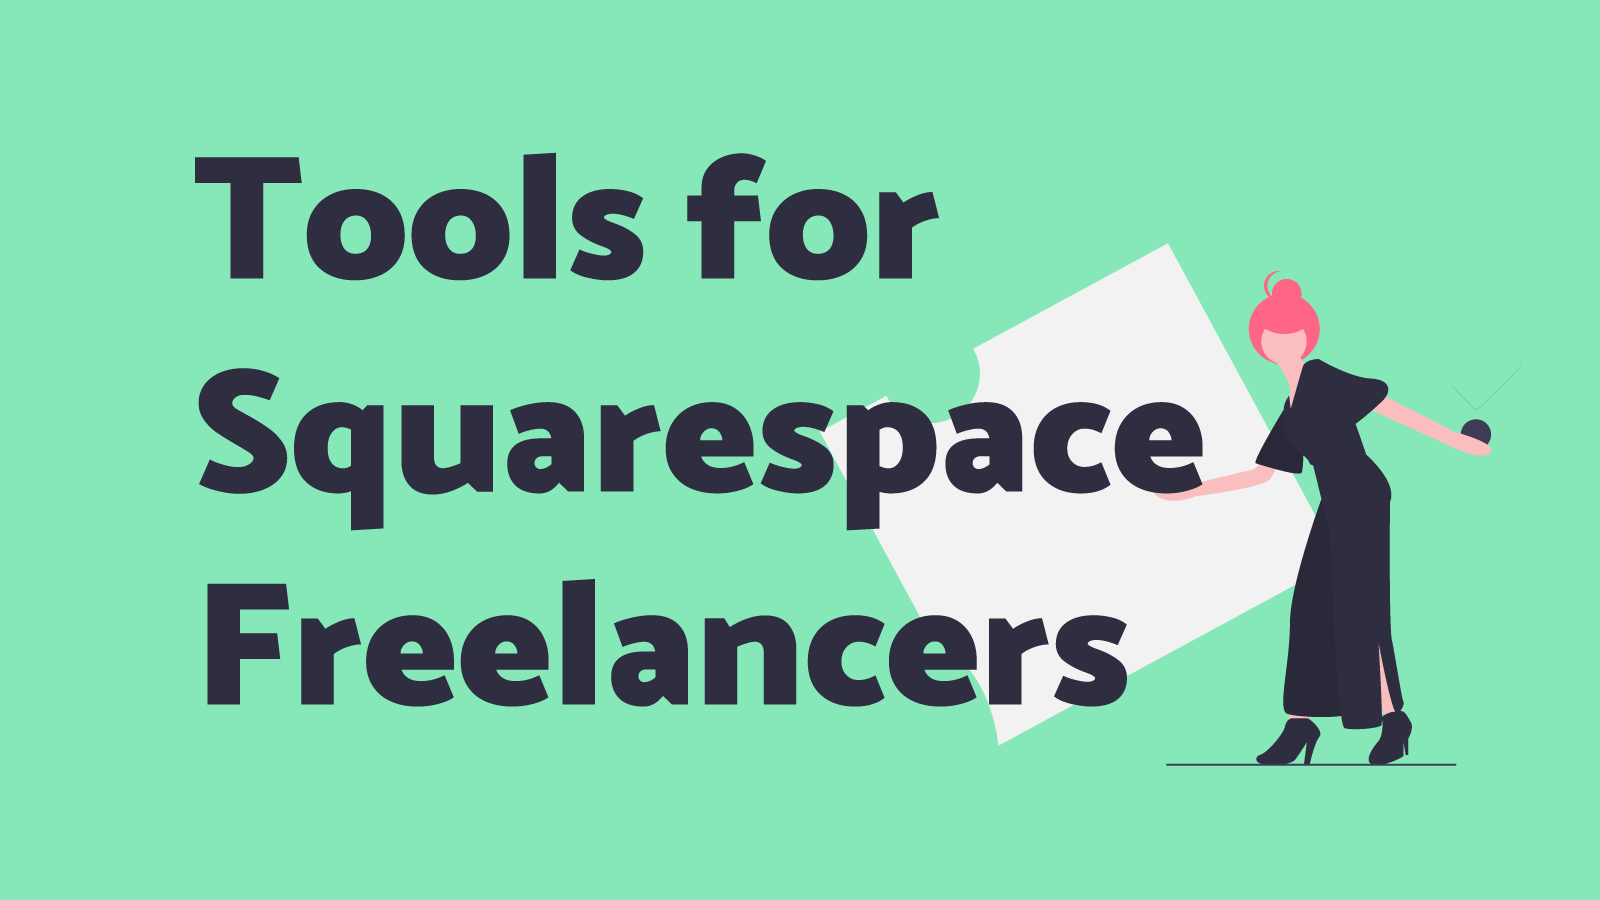 Resources for Squarespace Freelancers